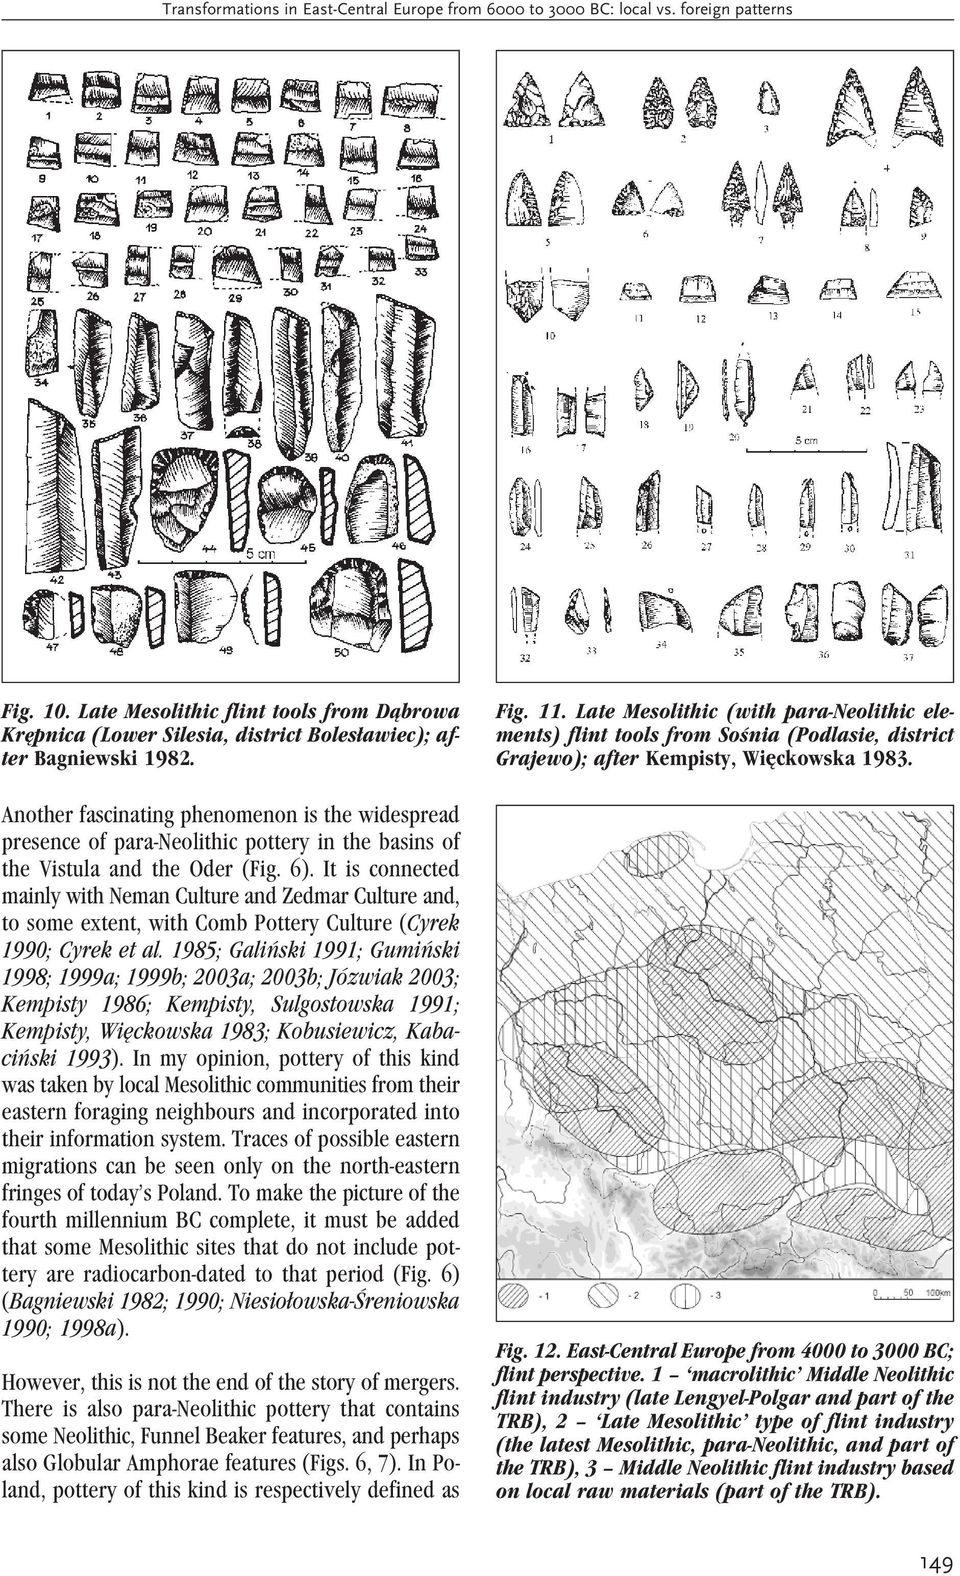 Another fascinating phenomenon is the widespread presence of para-neolithic pottery in the basins of the Vistula and the Oder (Fig. 6).